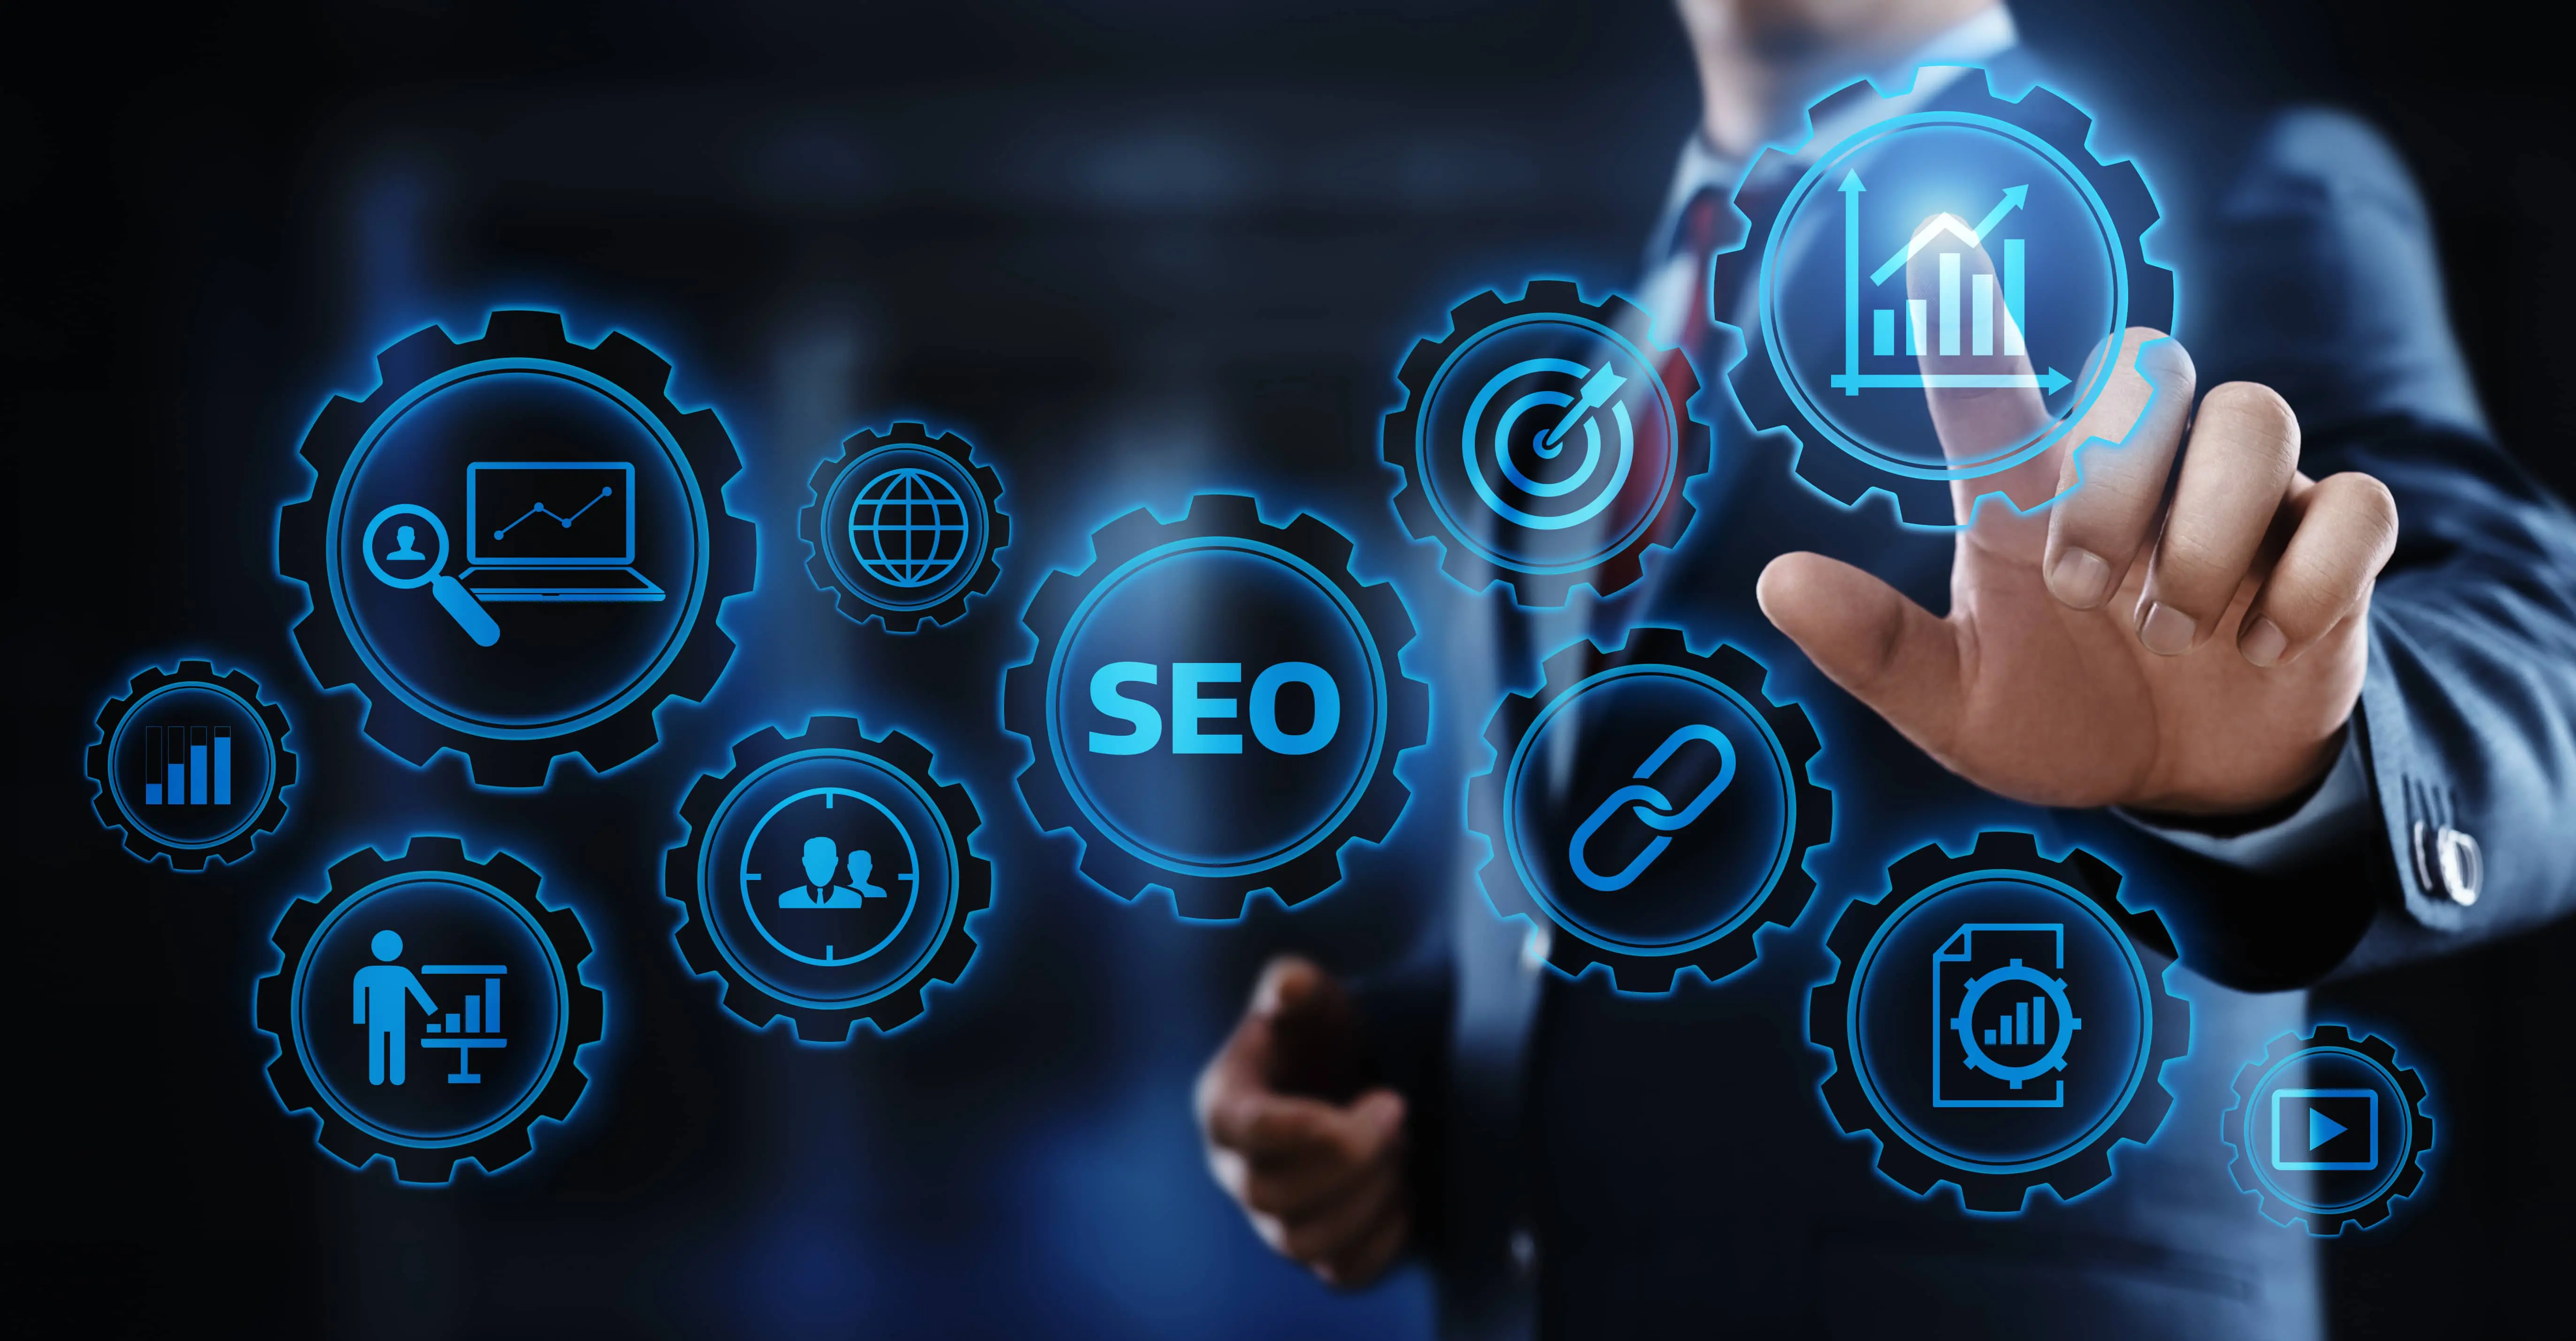 Mastering SEO Content Writing and Digital Marketing Like a Pro